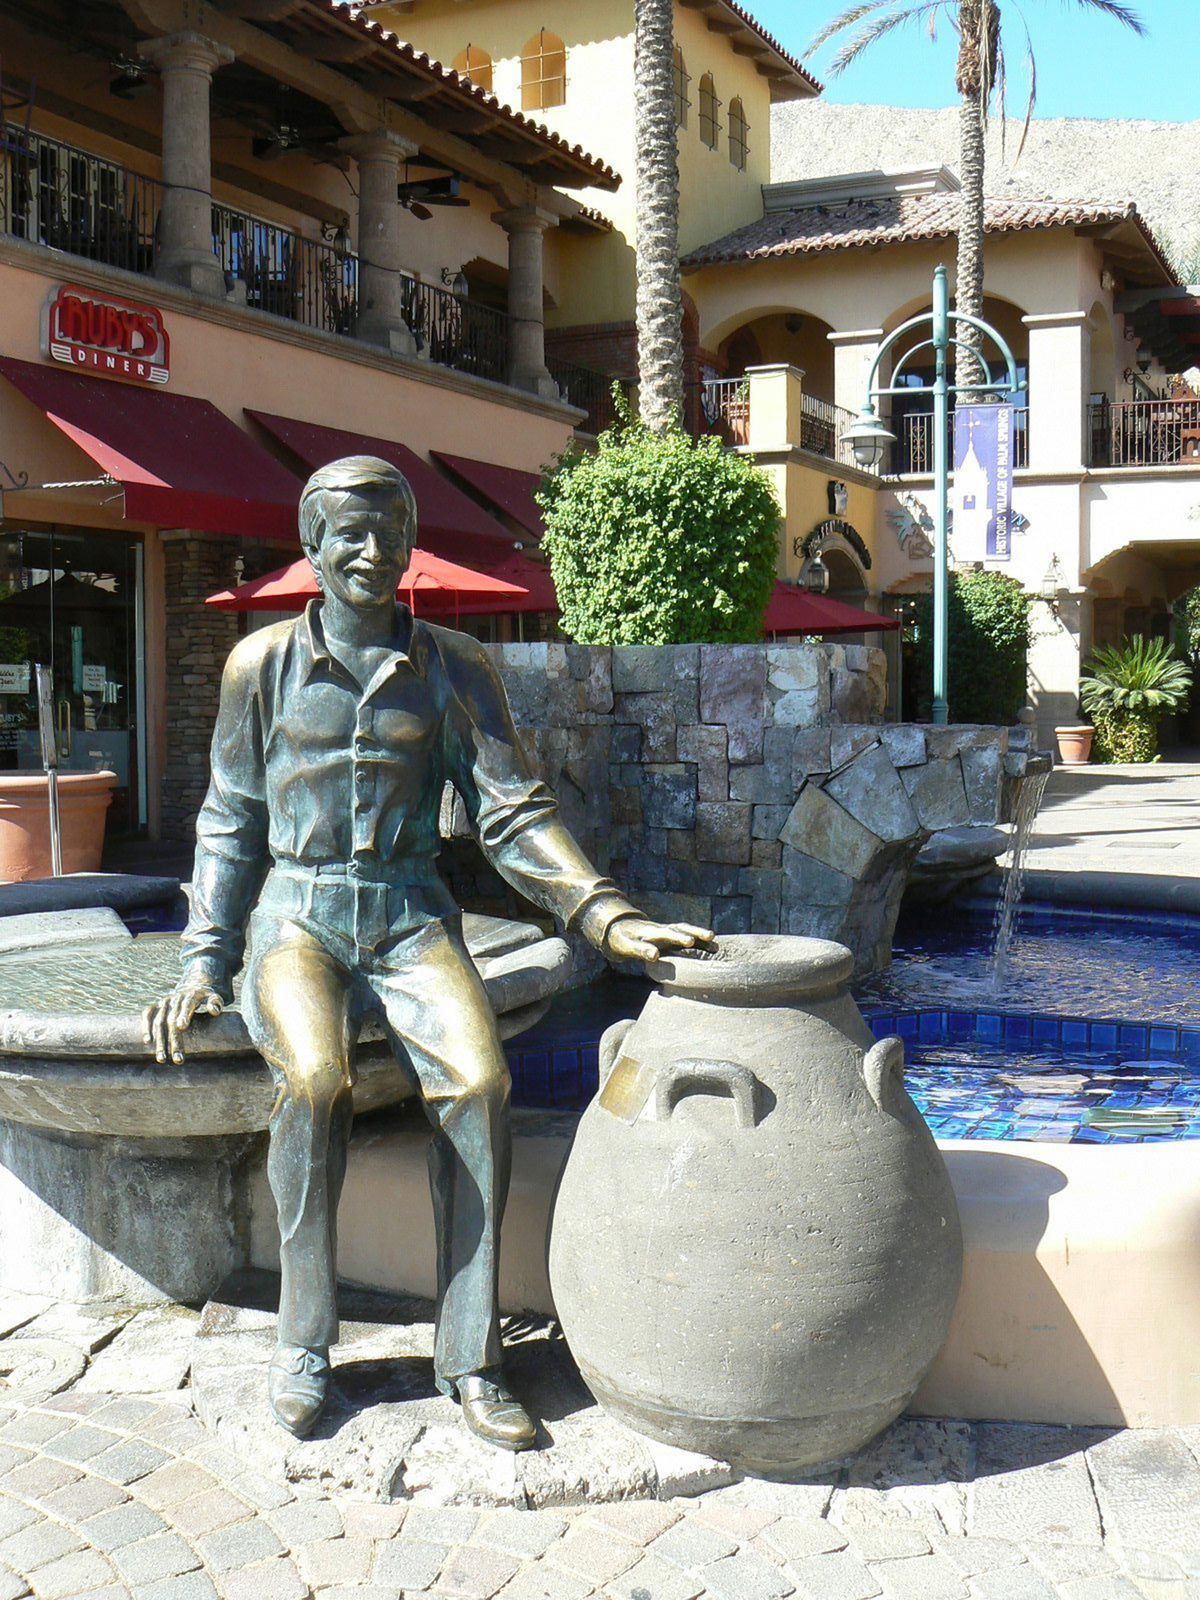 Below: A bronze statue of singer and former Palm Springs mayor Sonny Bono sits on Mercado Plaza in the historic downtown. A bronze star bearing his name is one of 200 embedded in the sidewalks along Palm Canyon Drive. (The Spokesman-Review)